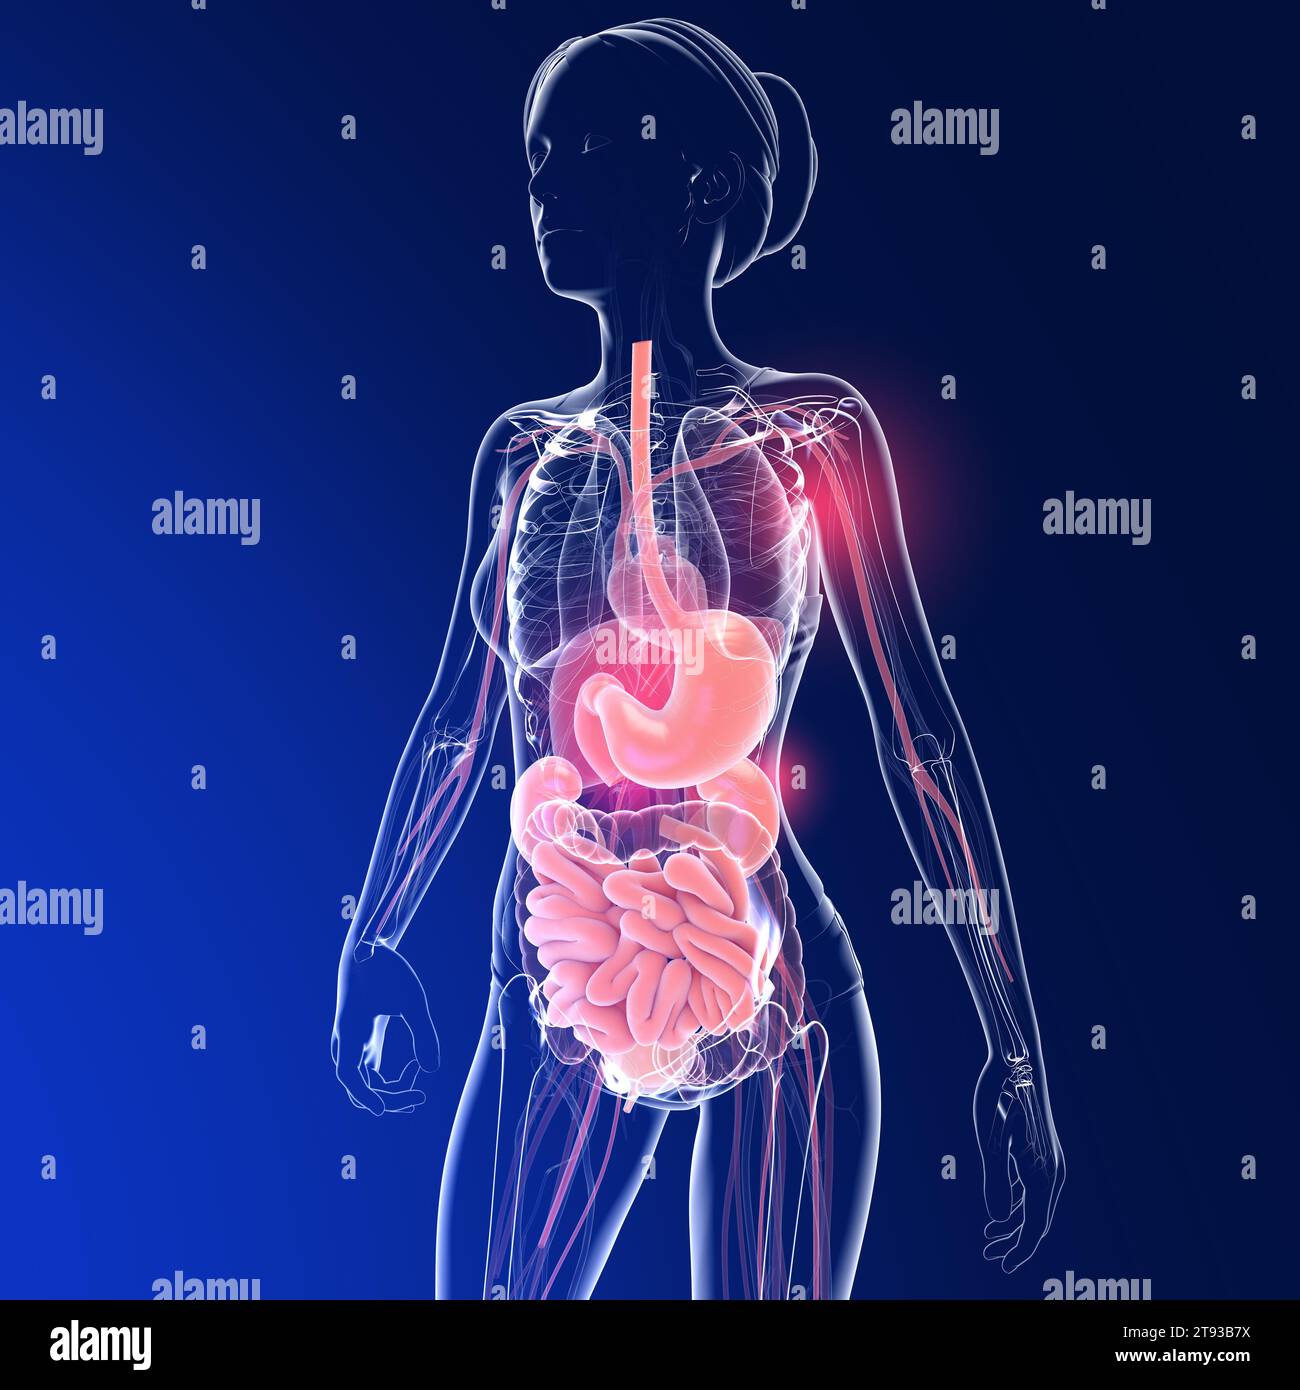 Transparent 3D illustration of a woman's digestive system. Anatomy of the intestines, stomach and other internal organs. Stock Photo